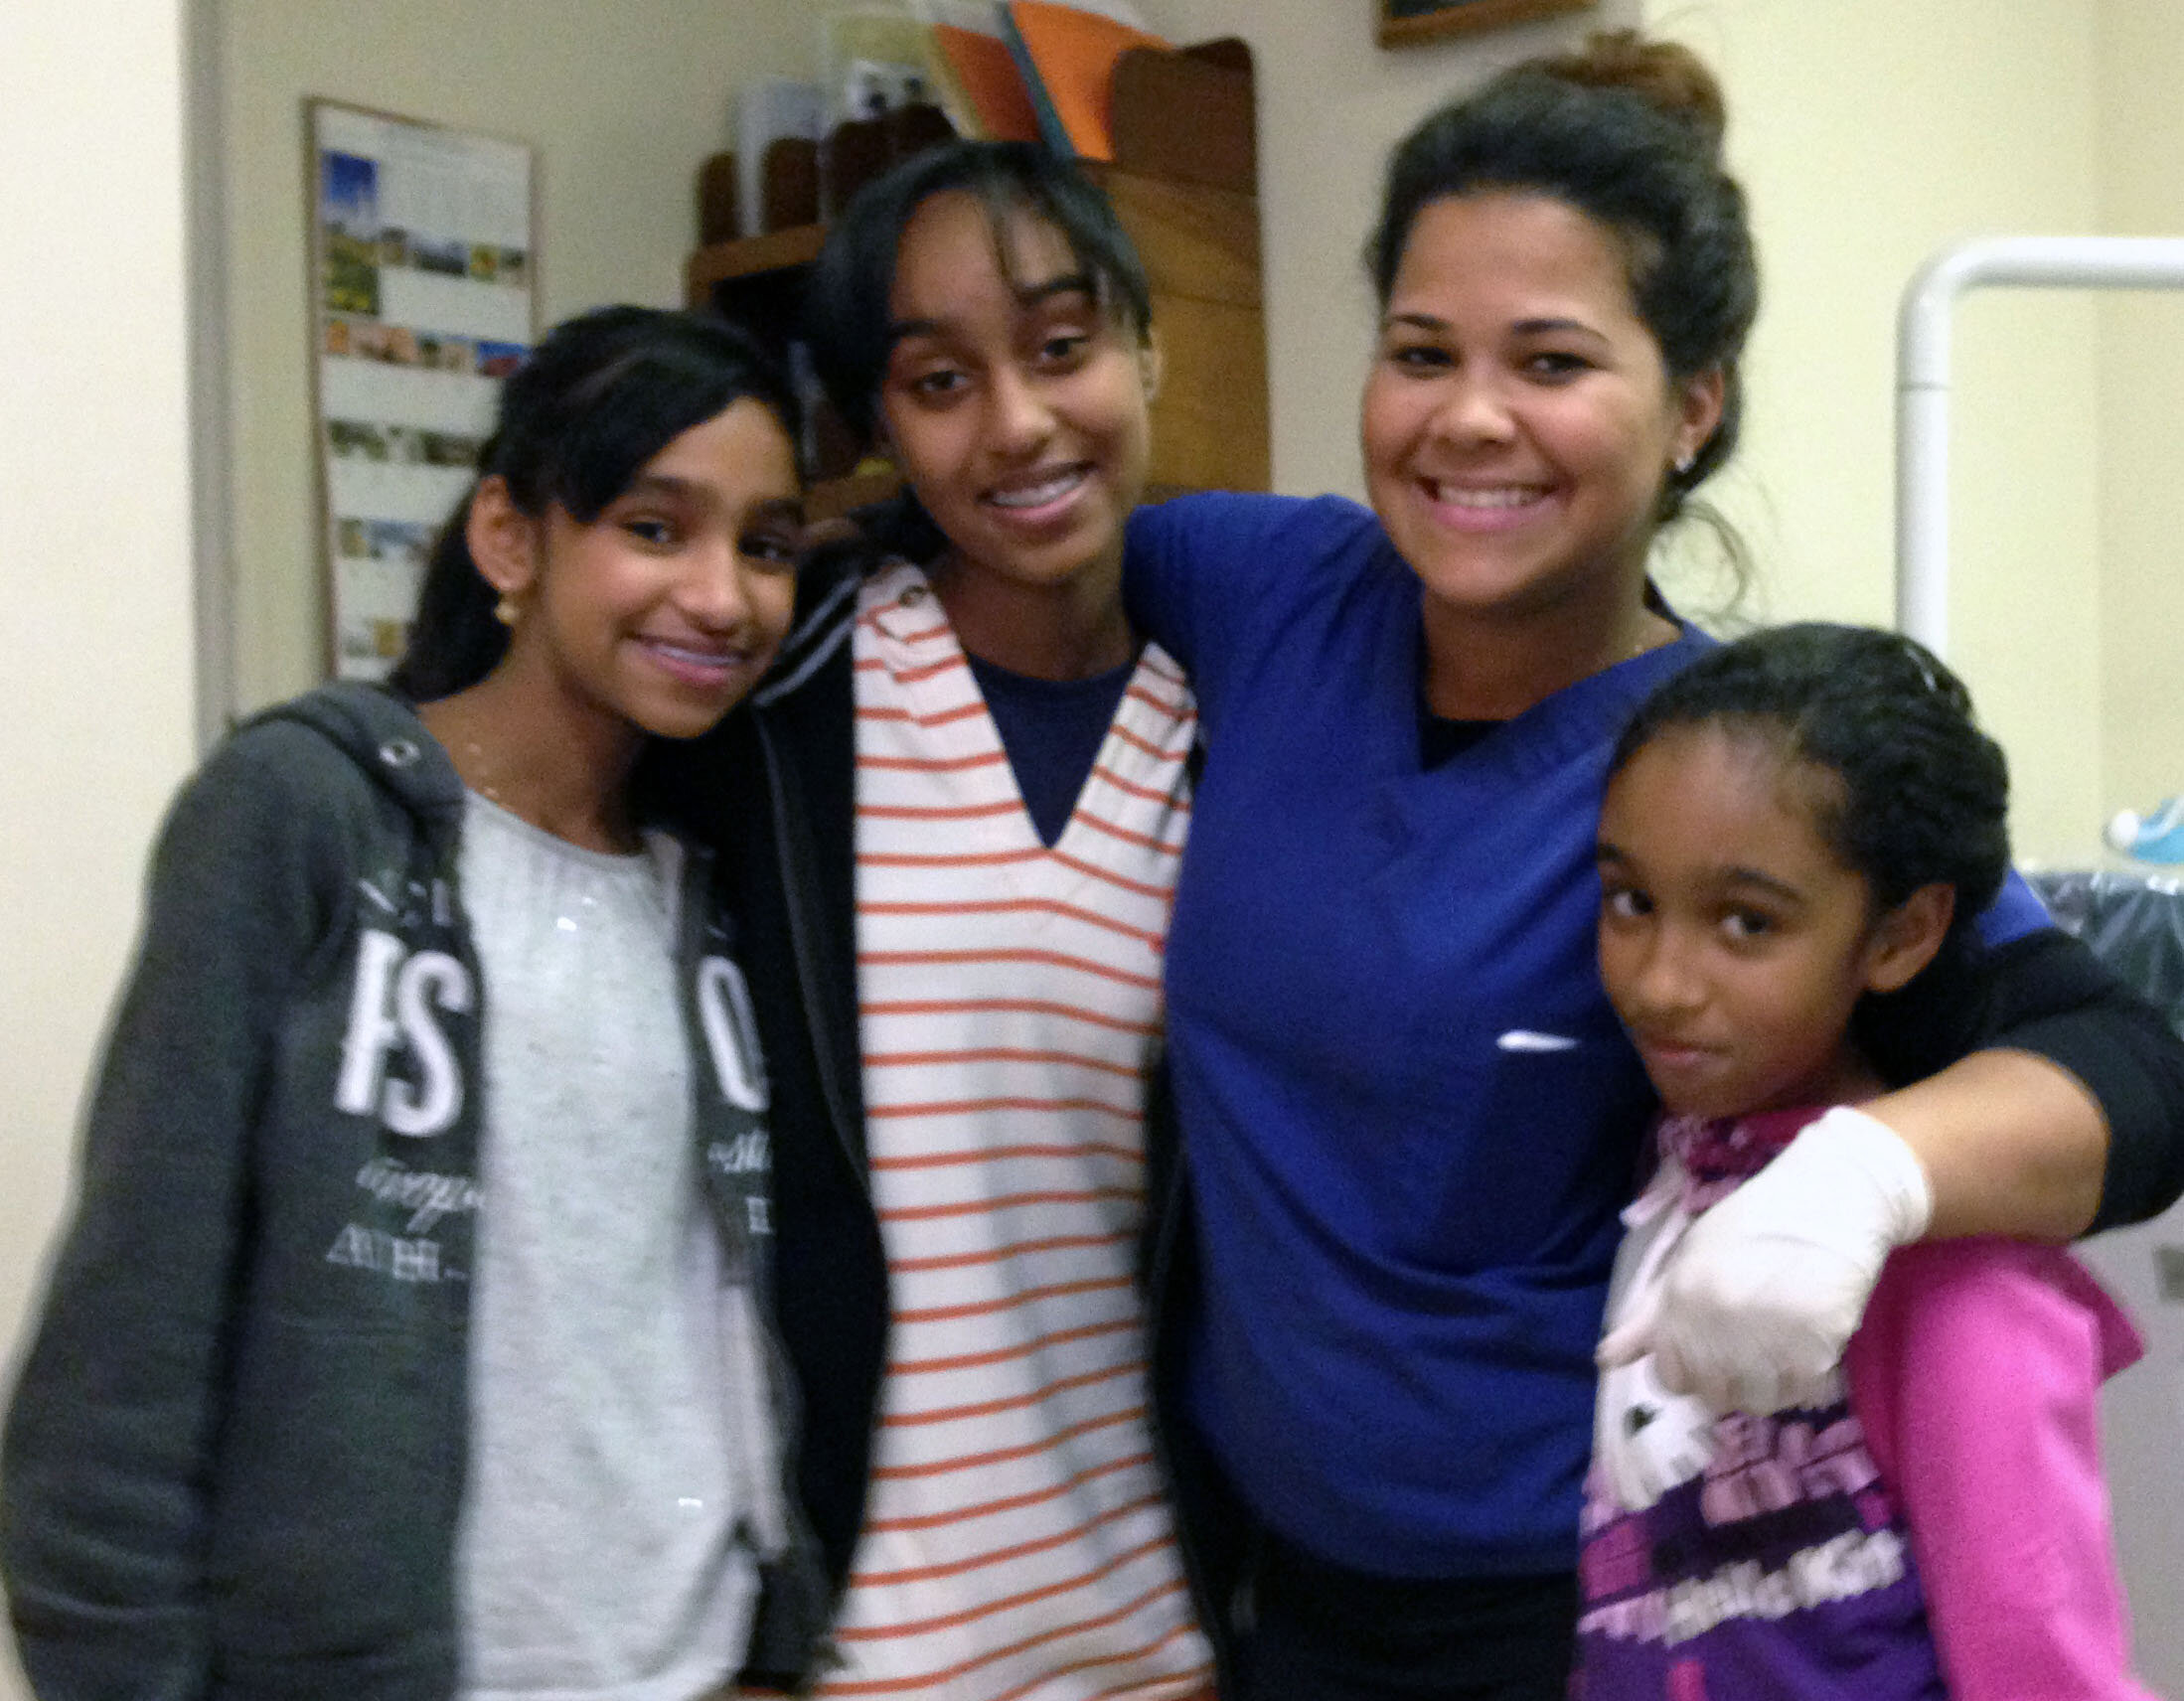 Uzmaa, Aquelaah, and Yusraa. The sisters who have braces together; all get to smile together with Diana.JPG